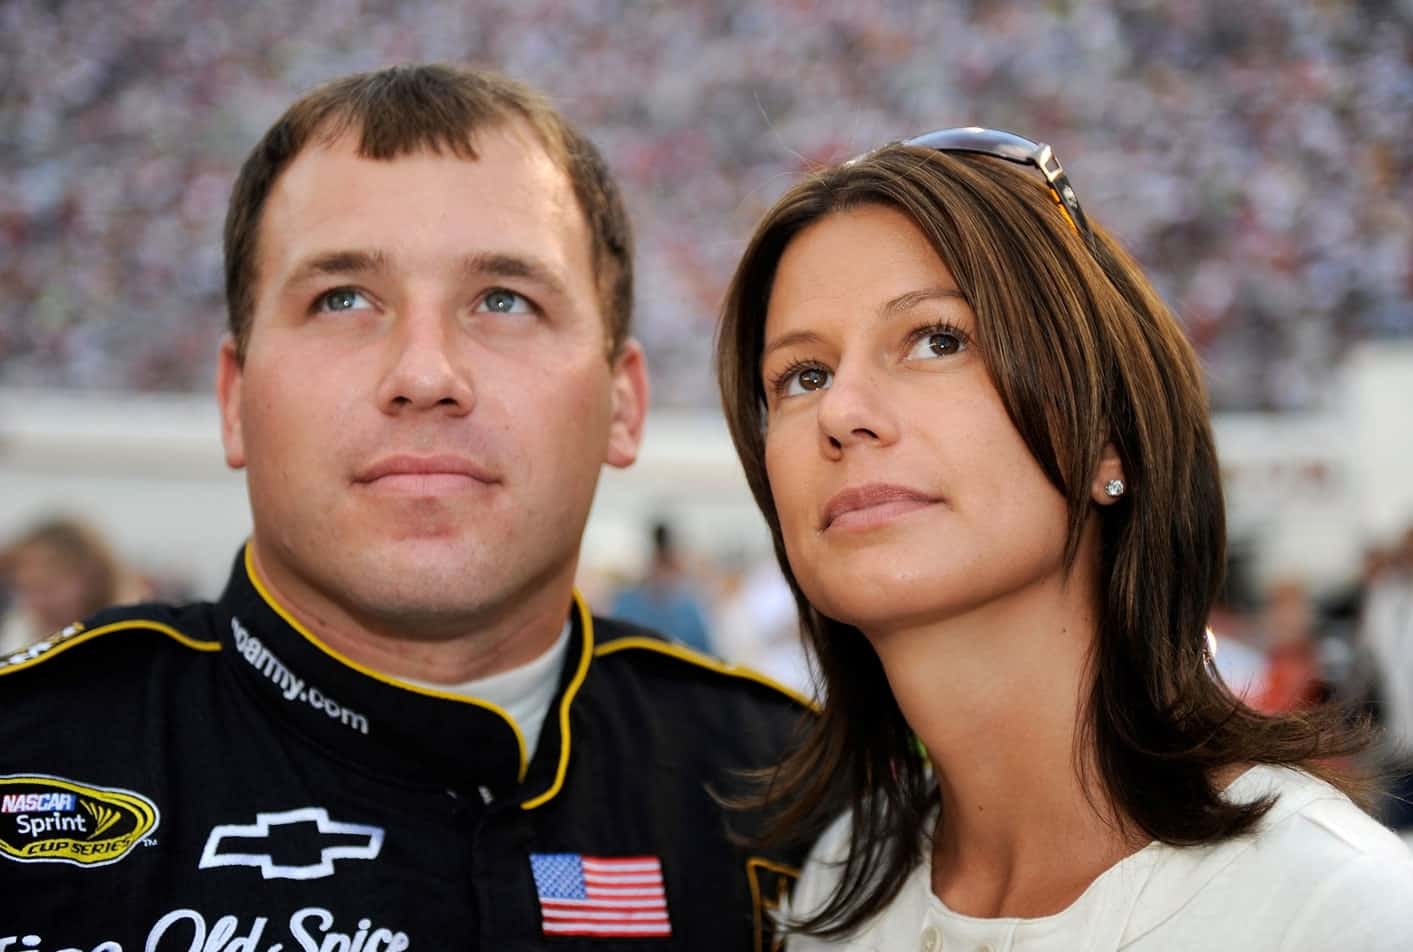 Image of Ryan Newman with his former partner, Krissie